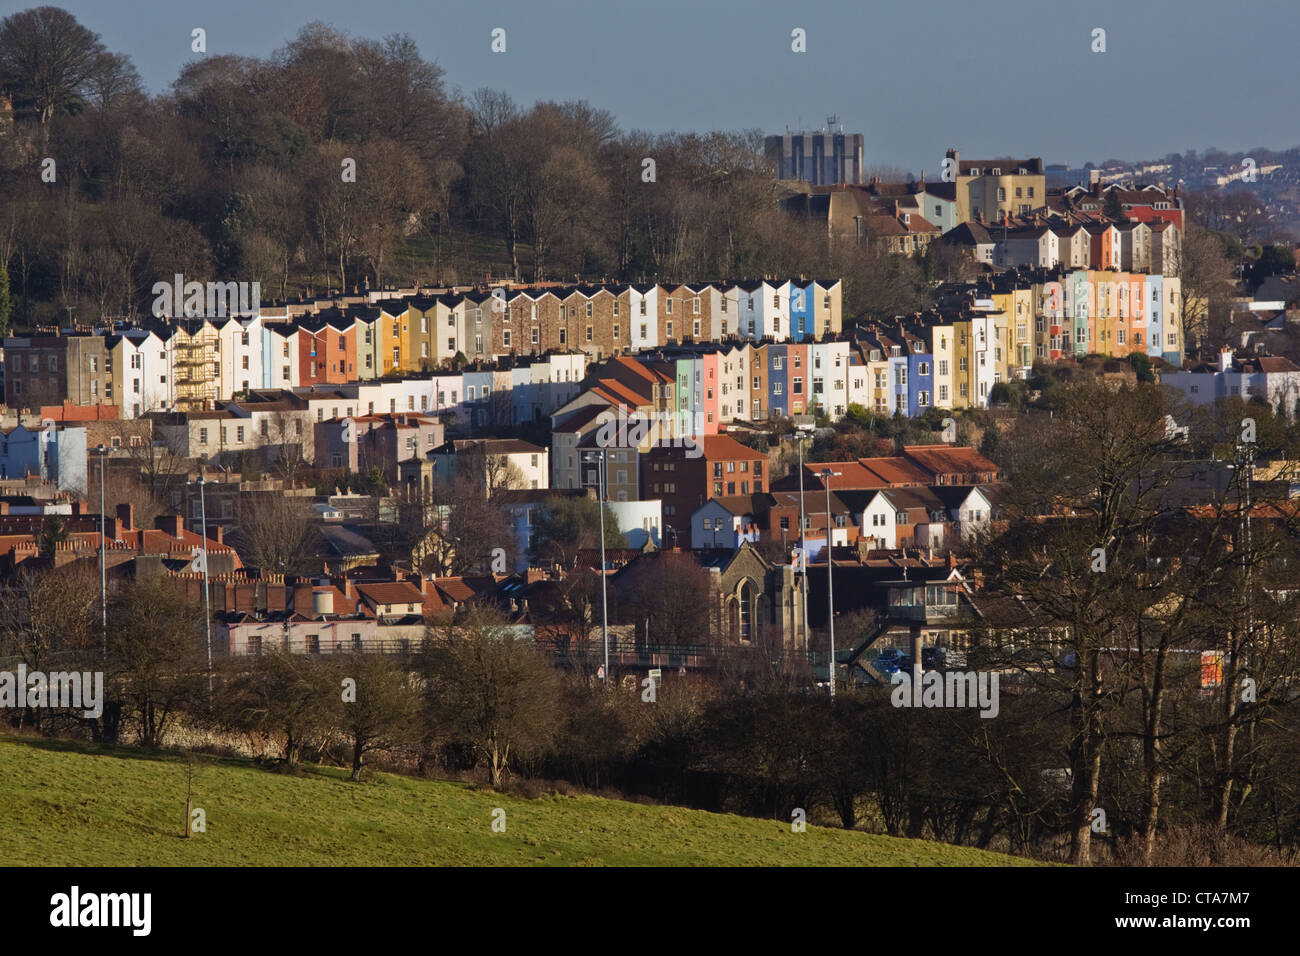 Rows of colourful hillside housing in winter in Bristol UK Stock Photo